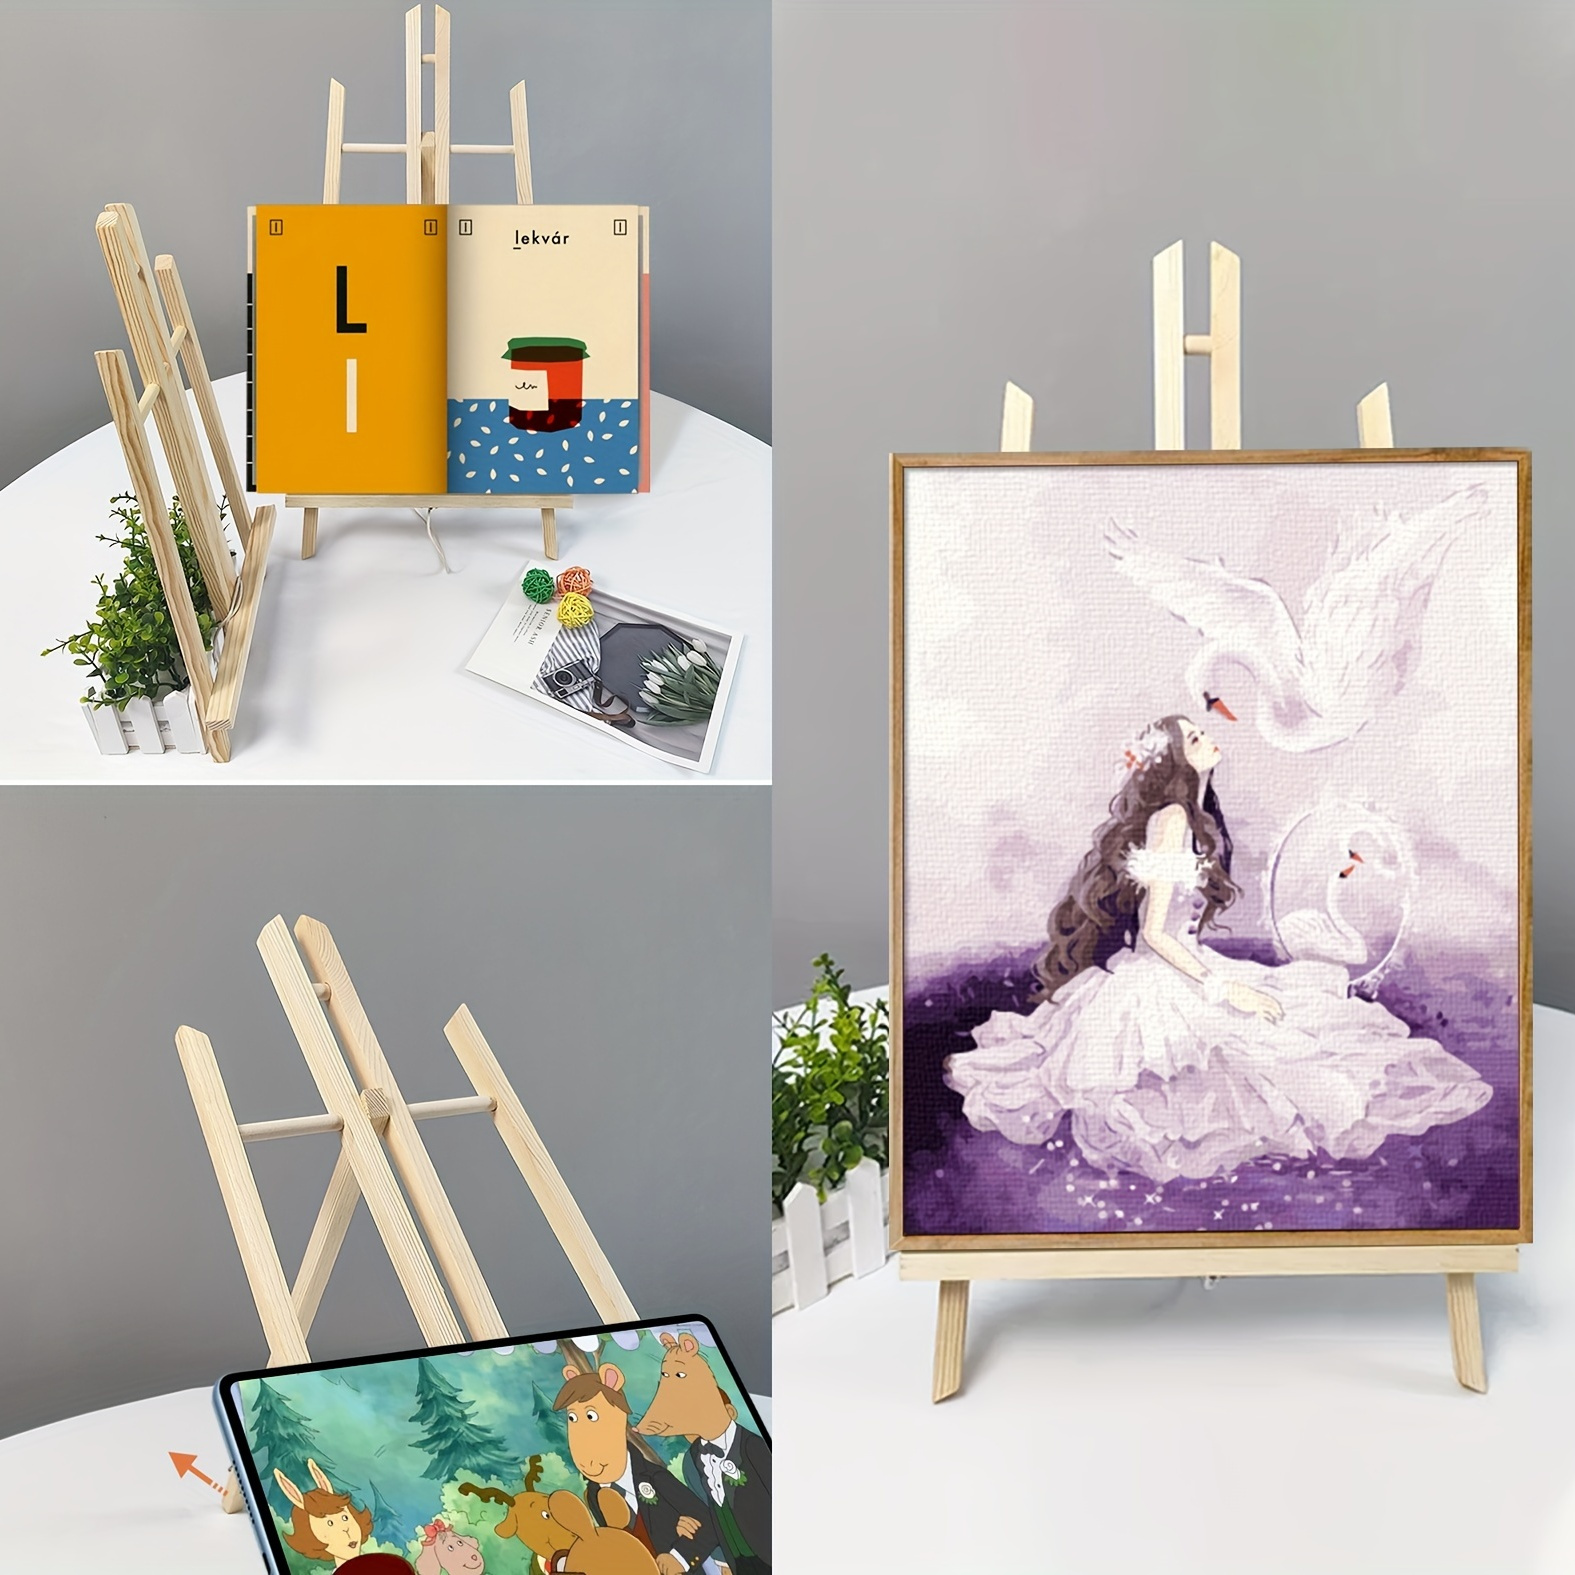 Heavy Duty Wooden Art Canvas Painting Easel Stand — Rickle.